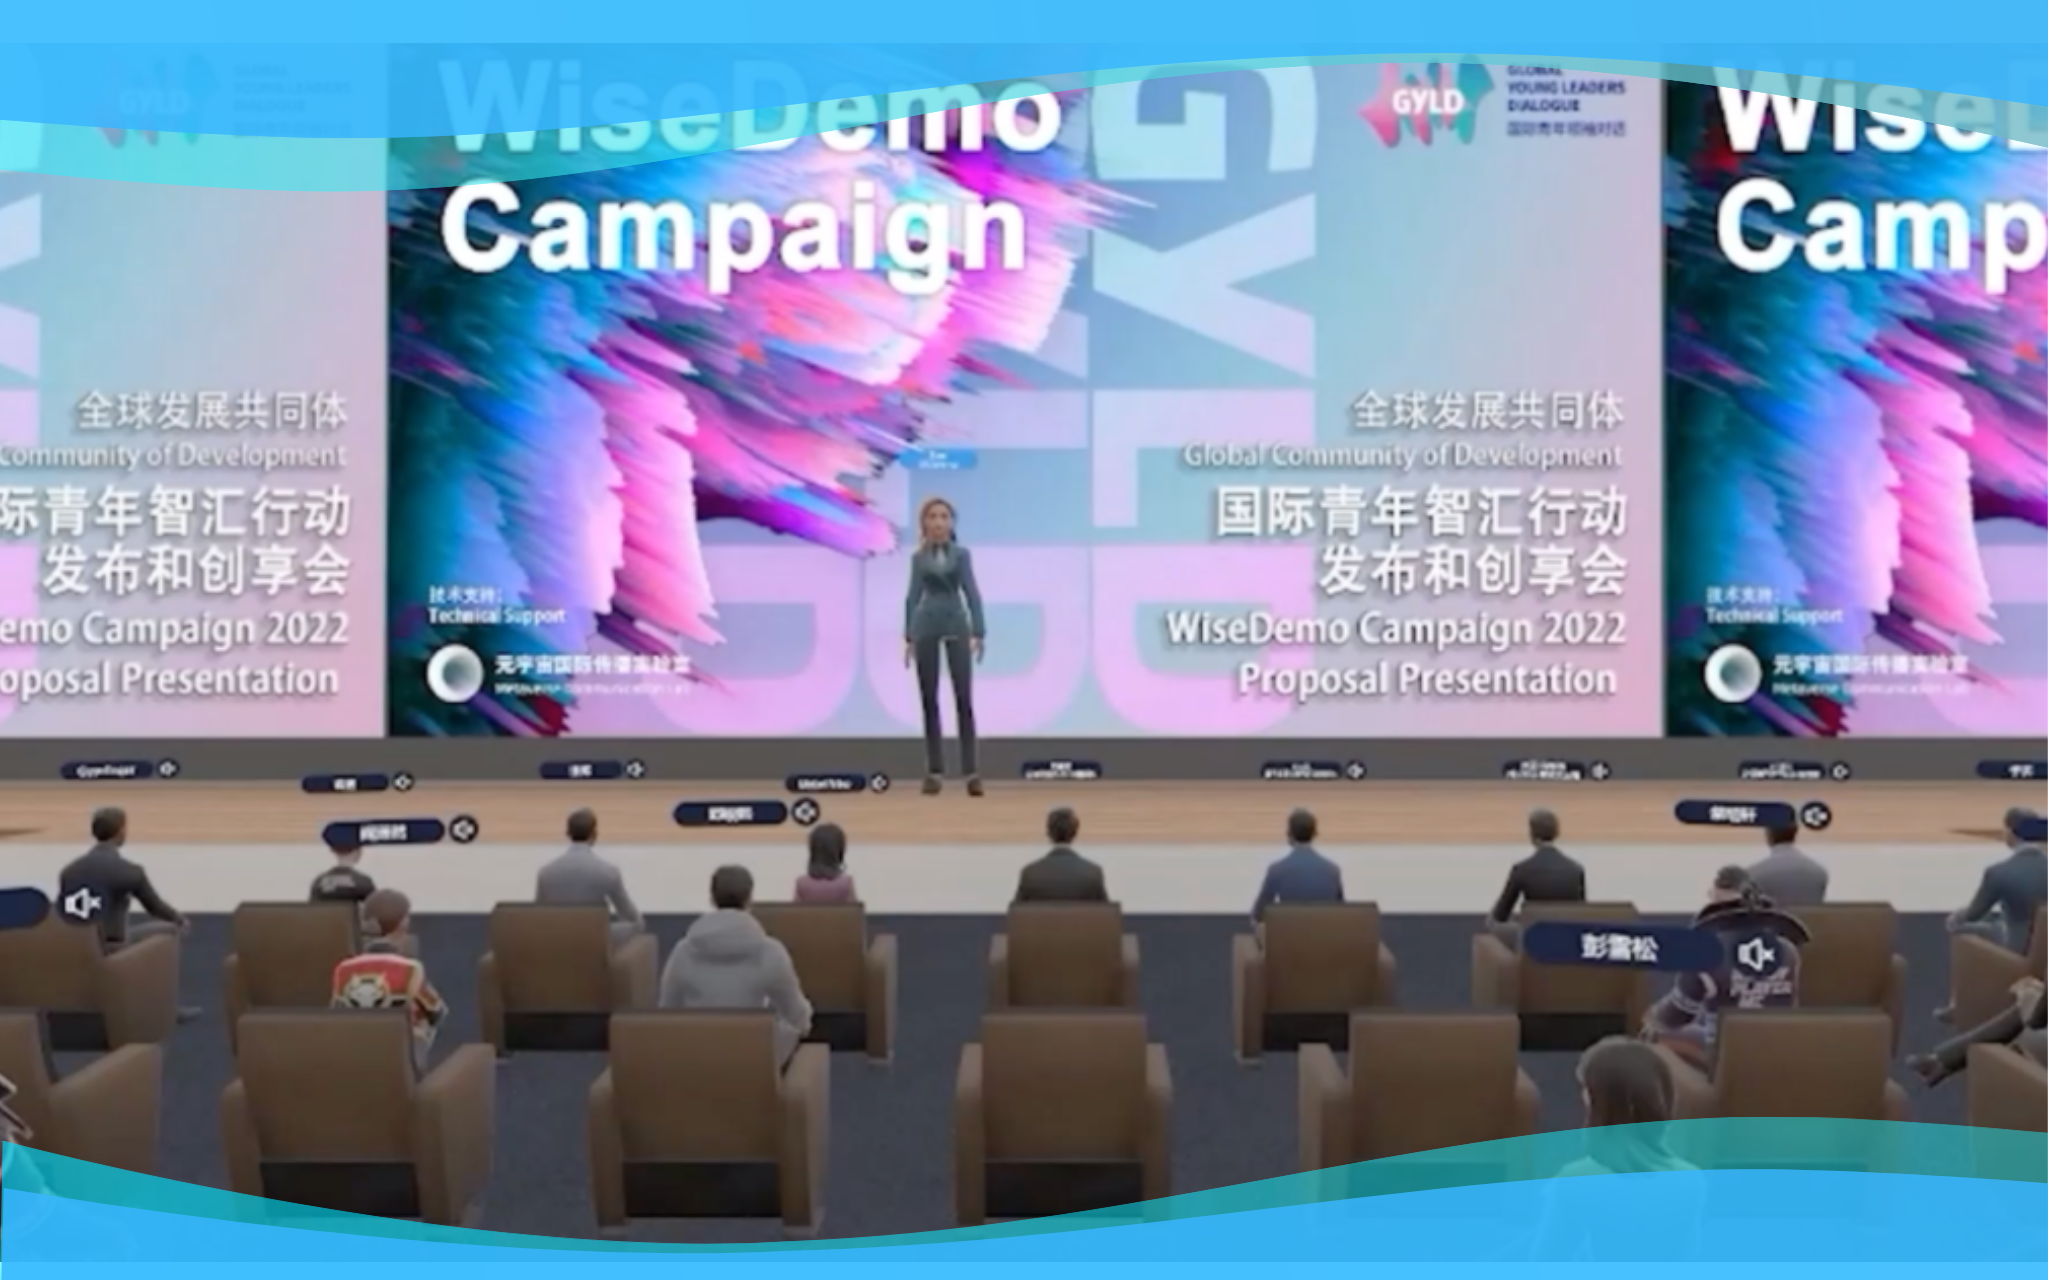 WiseDemo Campaign 2022 Proposal Presentation in the Metaverse: Model SCO reached the TOP 10￼